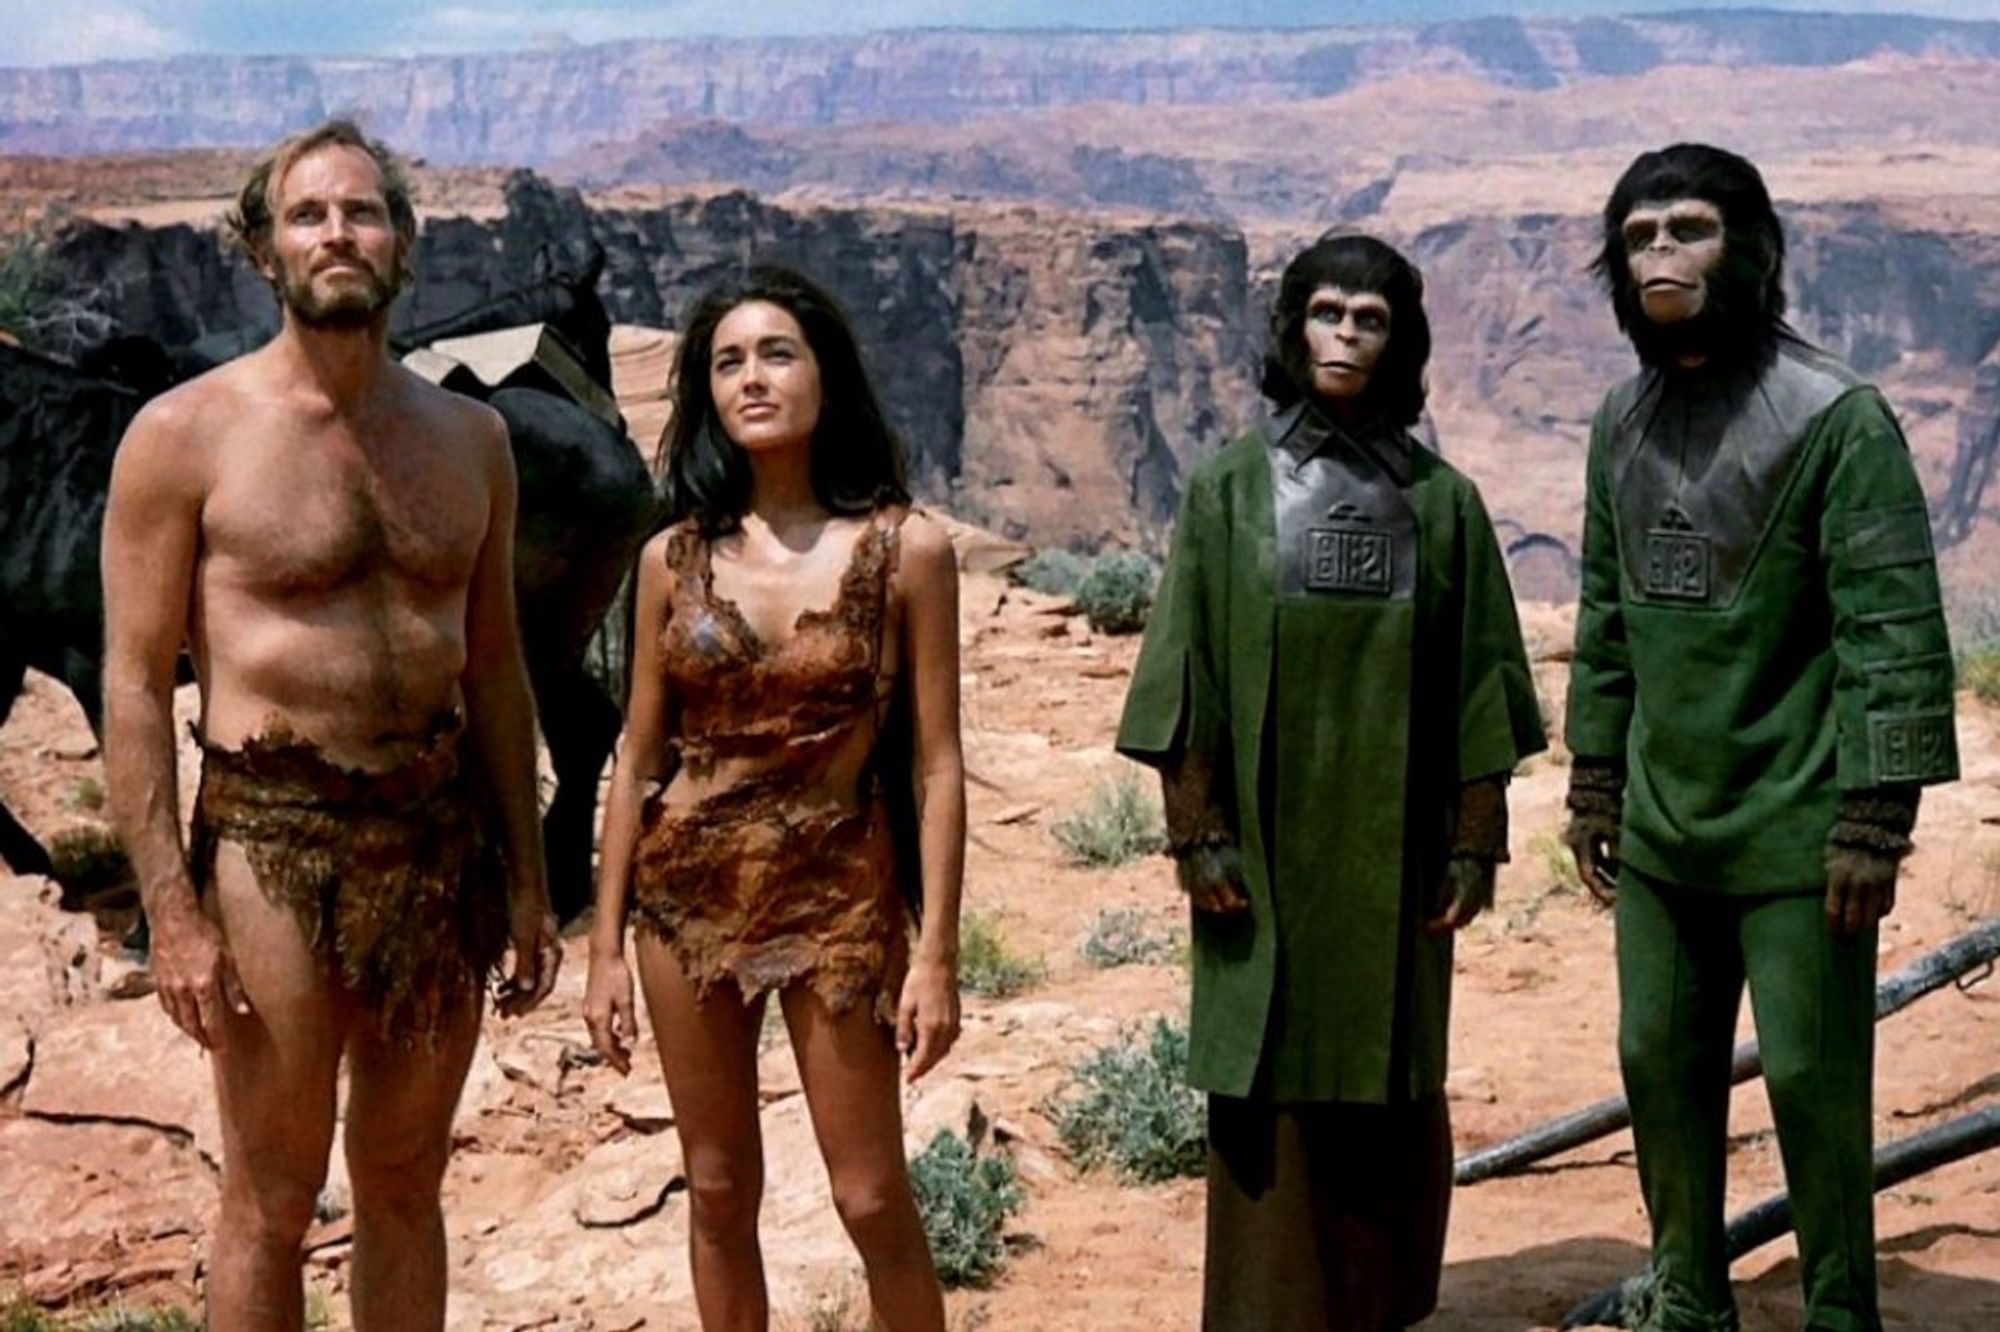 Photo of Charlton Heston, Kim Hunter, and two of the "apes" from Planet of the Apes.